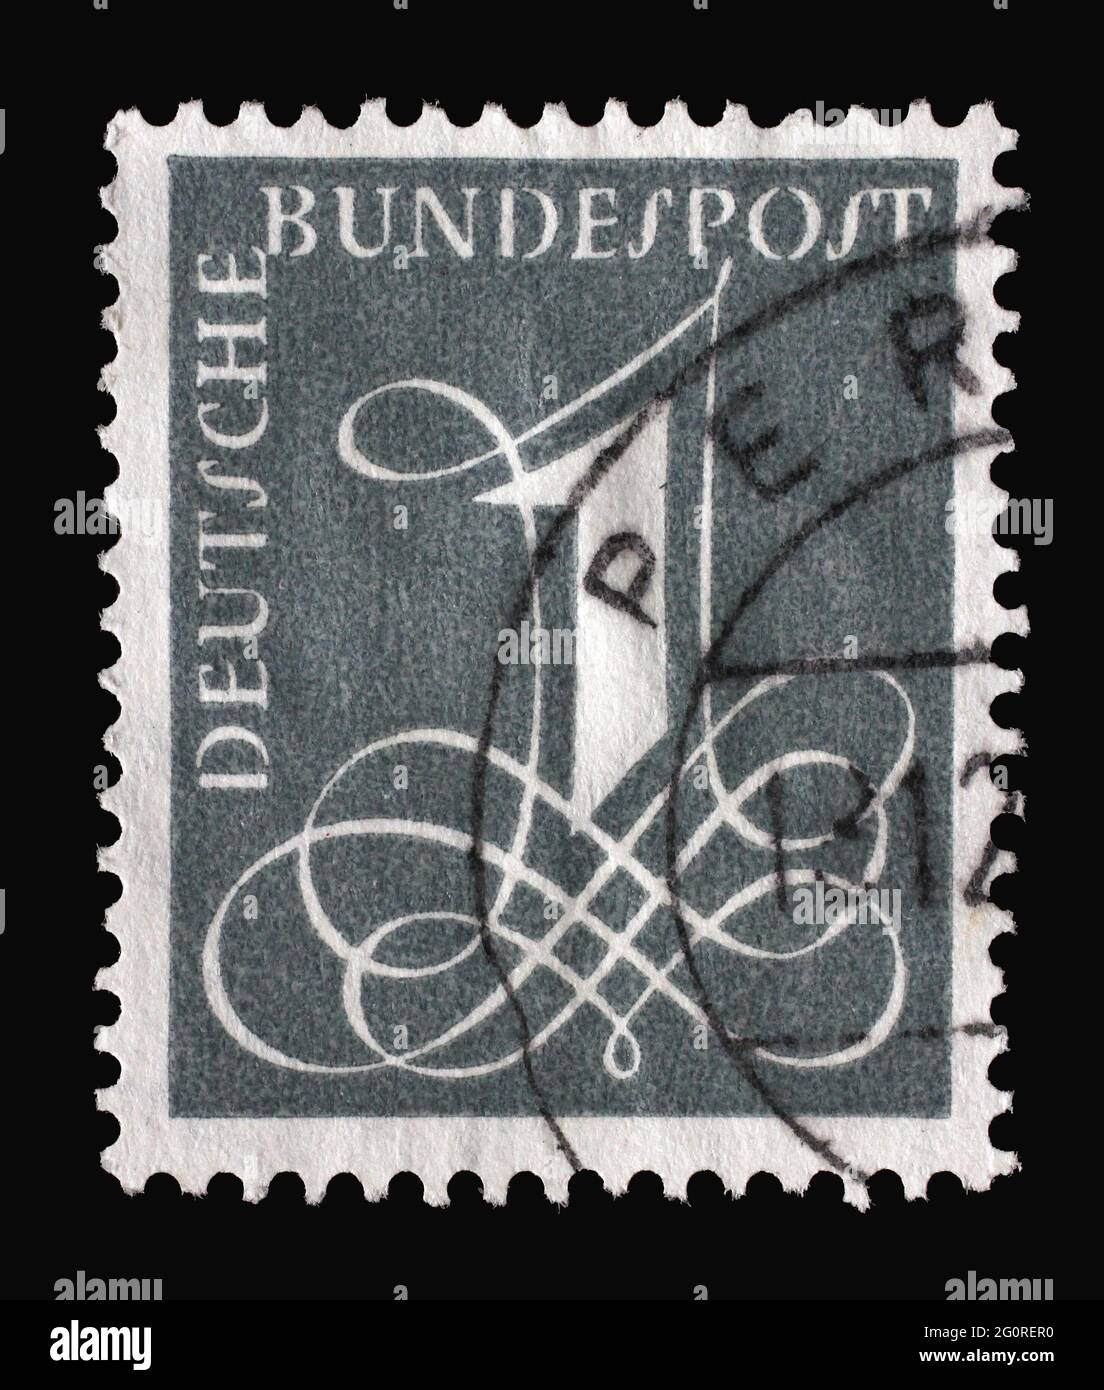 Stamp printed in Germany shows Number 1 in an ornament font, circa 1958 Stock Photo